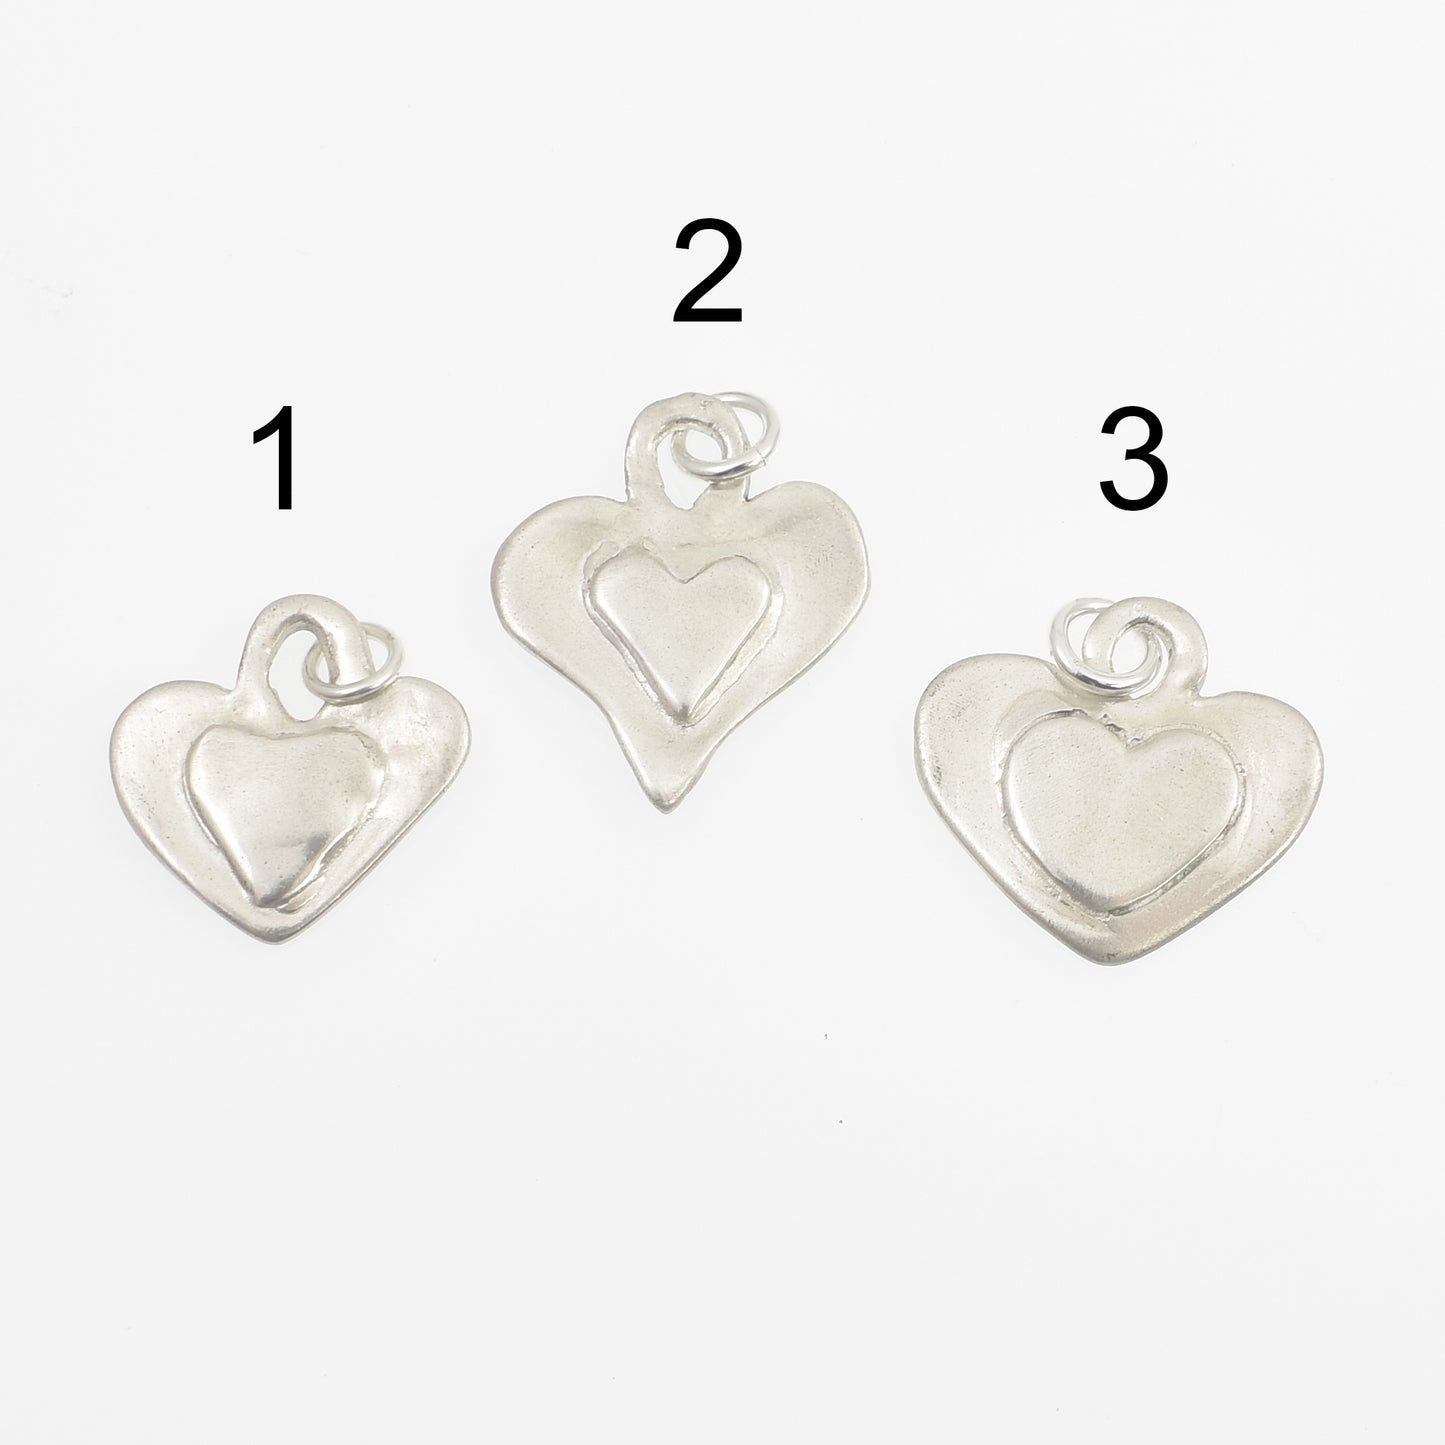 Sterling Silver Heart on Heart Charms All 3 Designs with numbers above for ordering